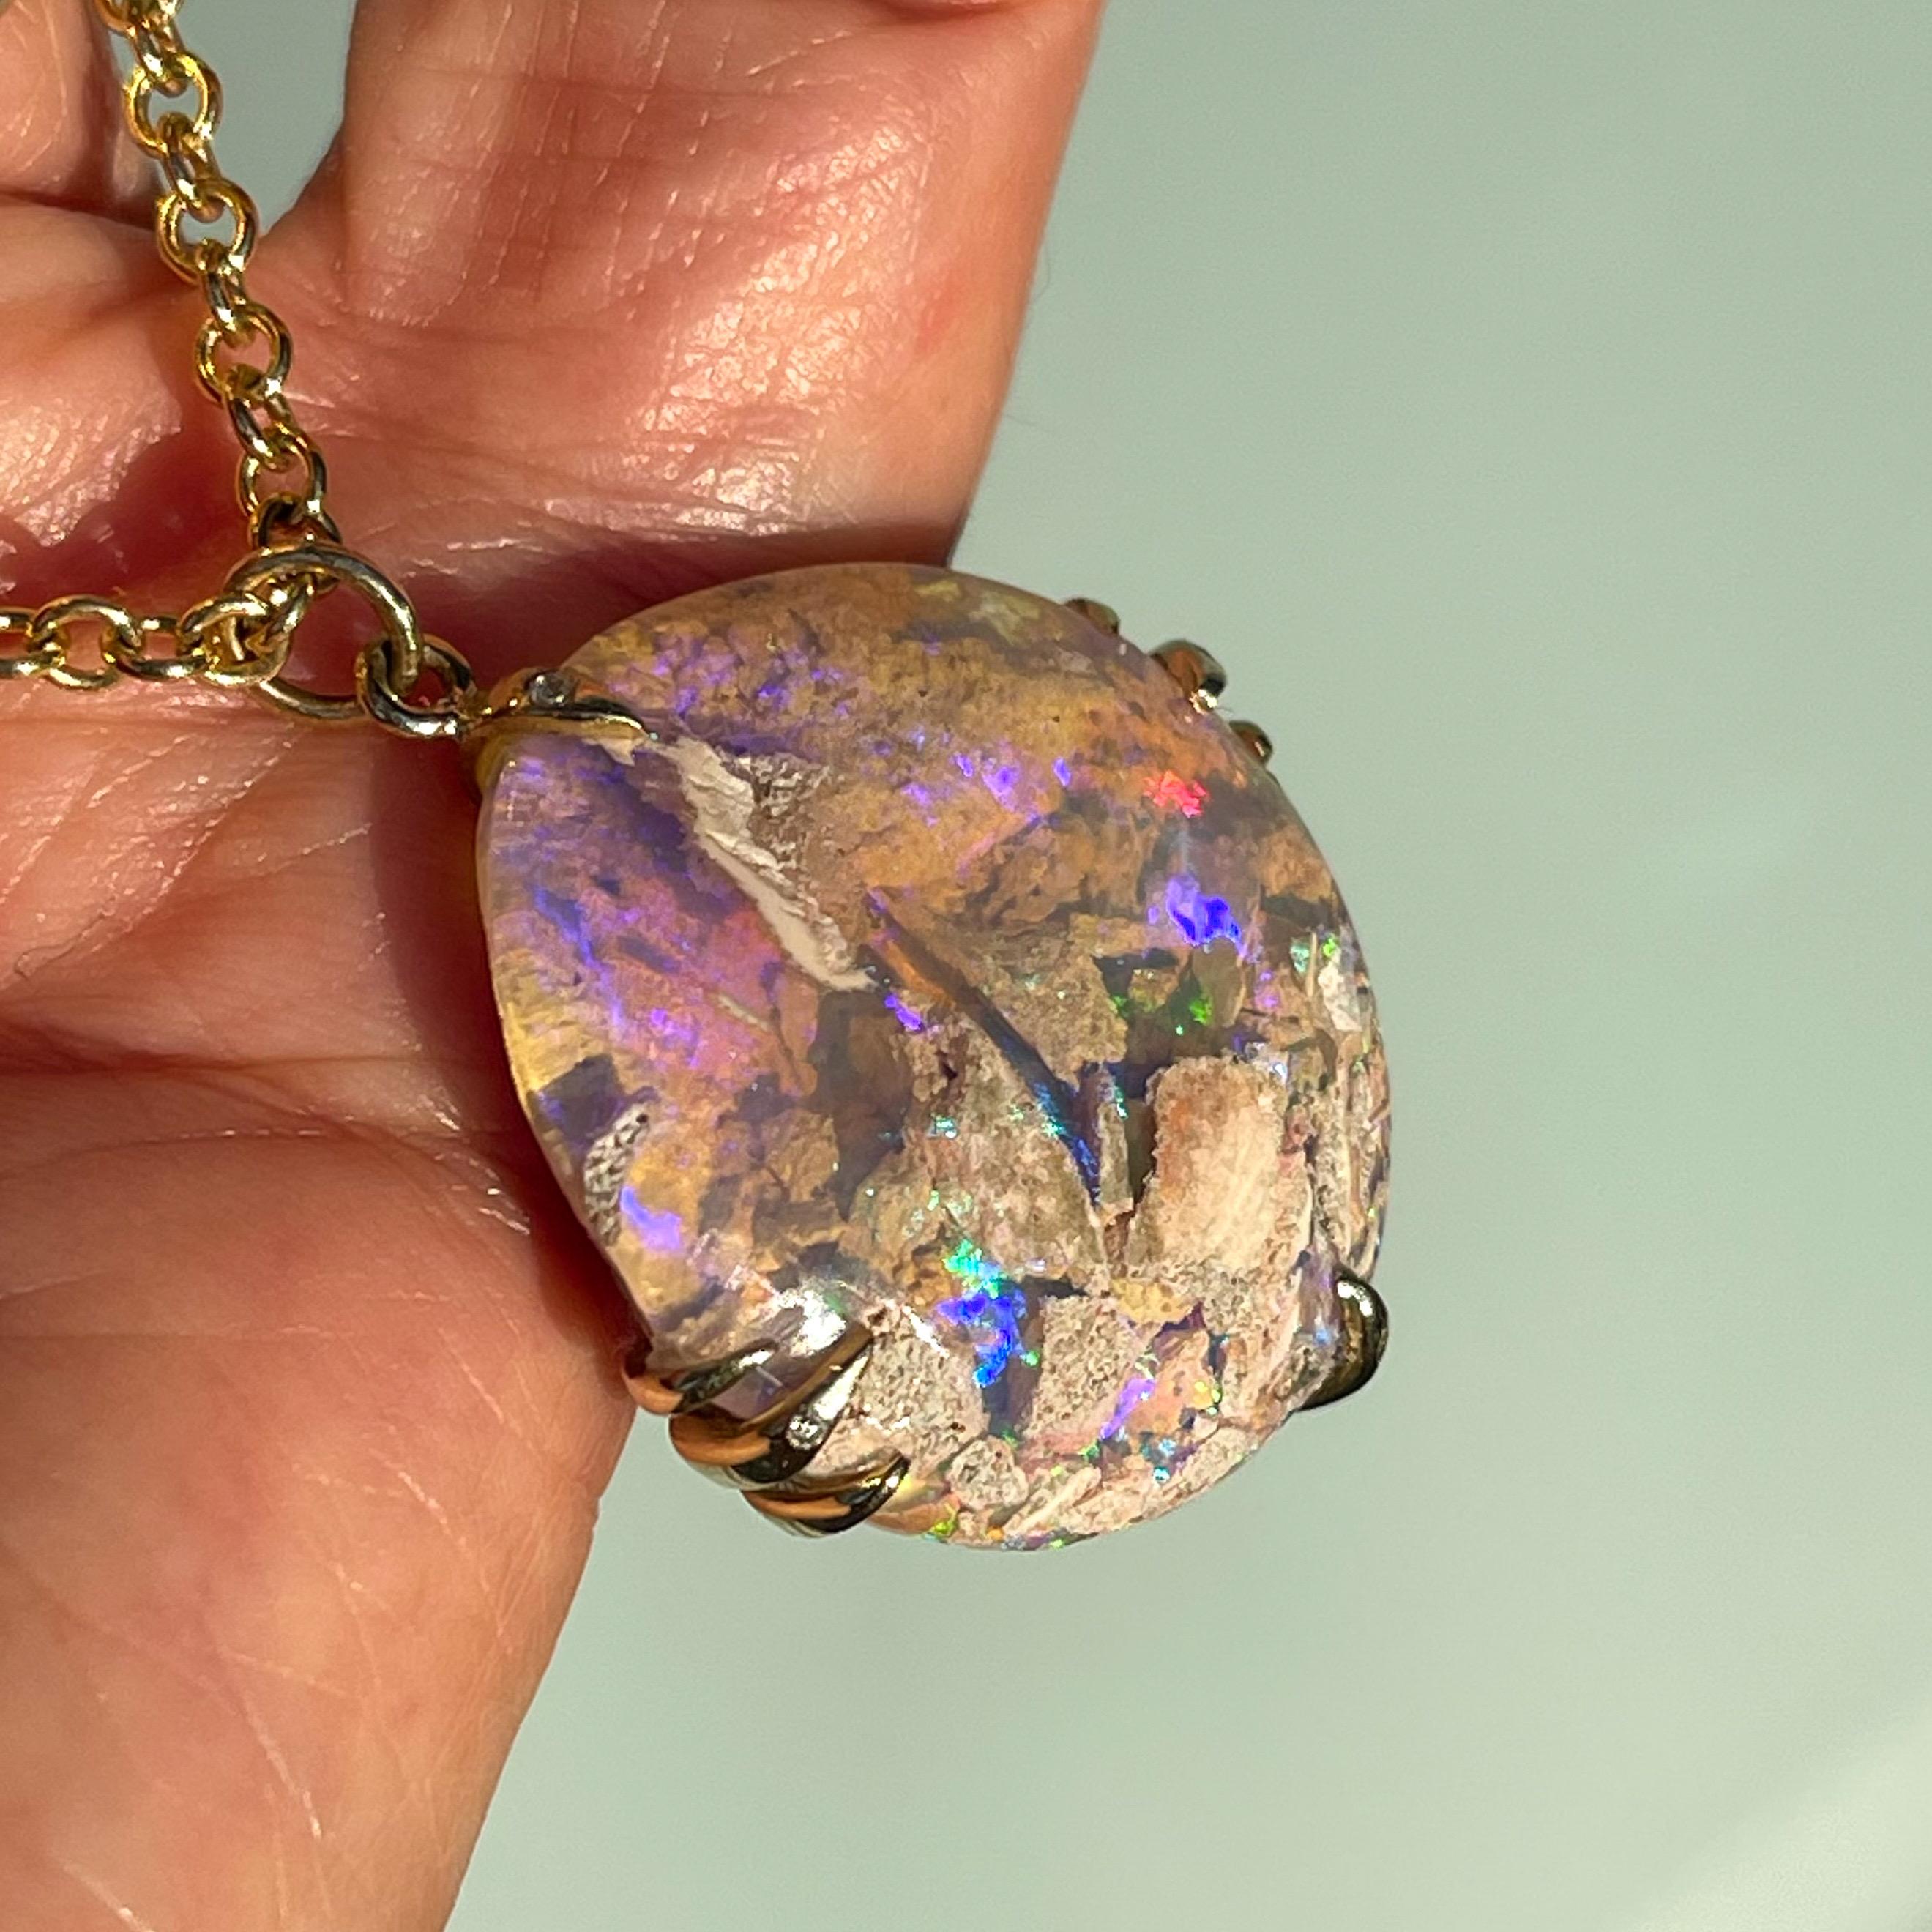 Brilliant Cut NIXIN Jewelry A Walk on the Moon Australian Opal Necklace in Gold with Diamonds